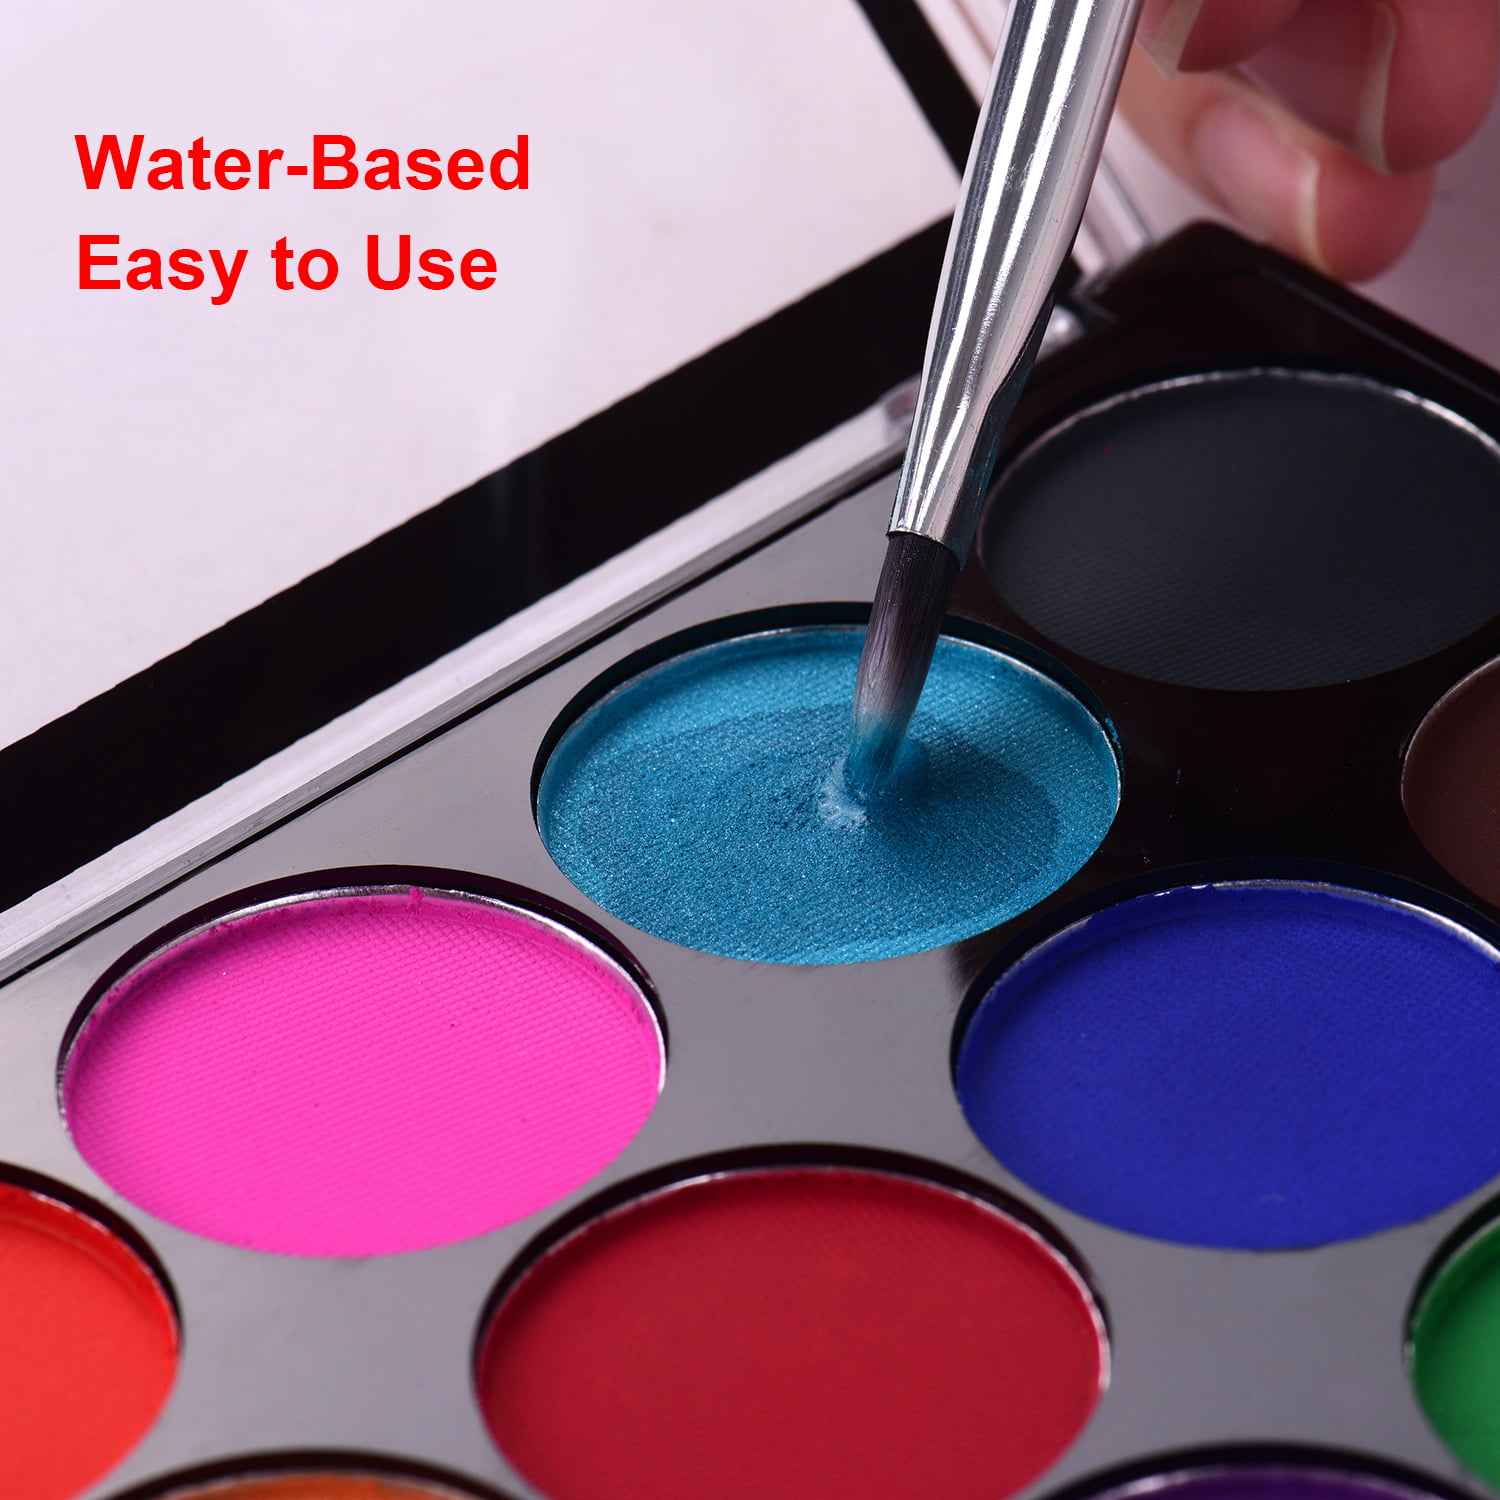 Face Painting Kit for Kids Adults, Water Activated Body Face Paint, 15 Colors Water Based Facepaints Makeup Palette 12 Pcs Brushes, Stencils, Non